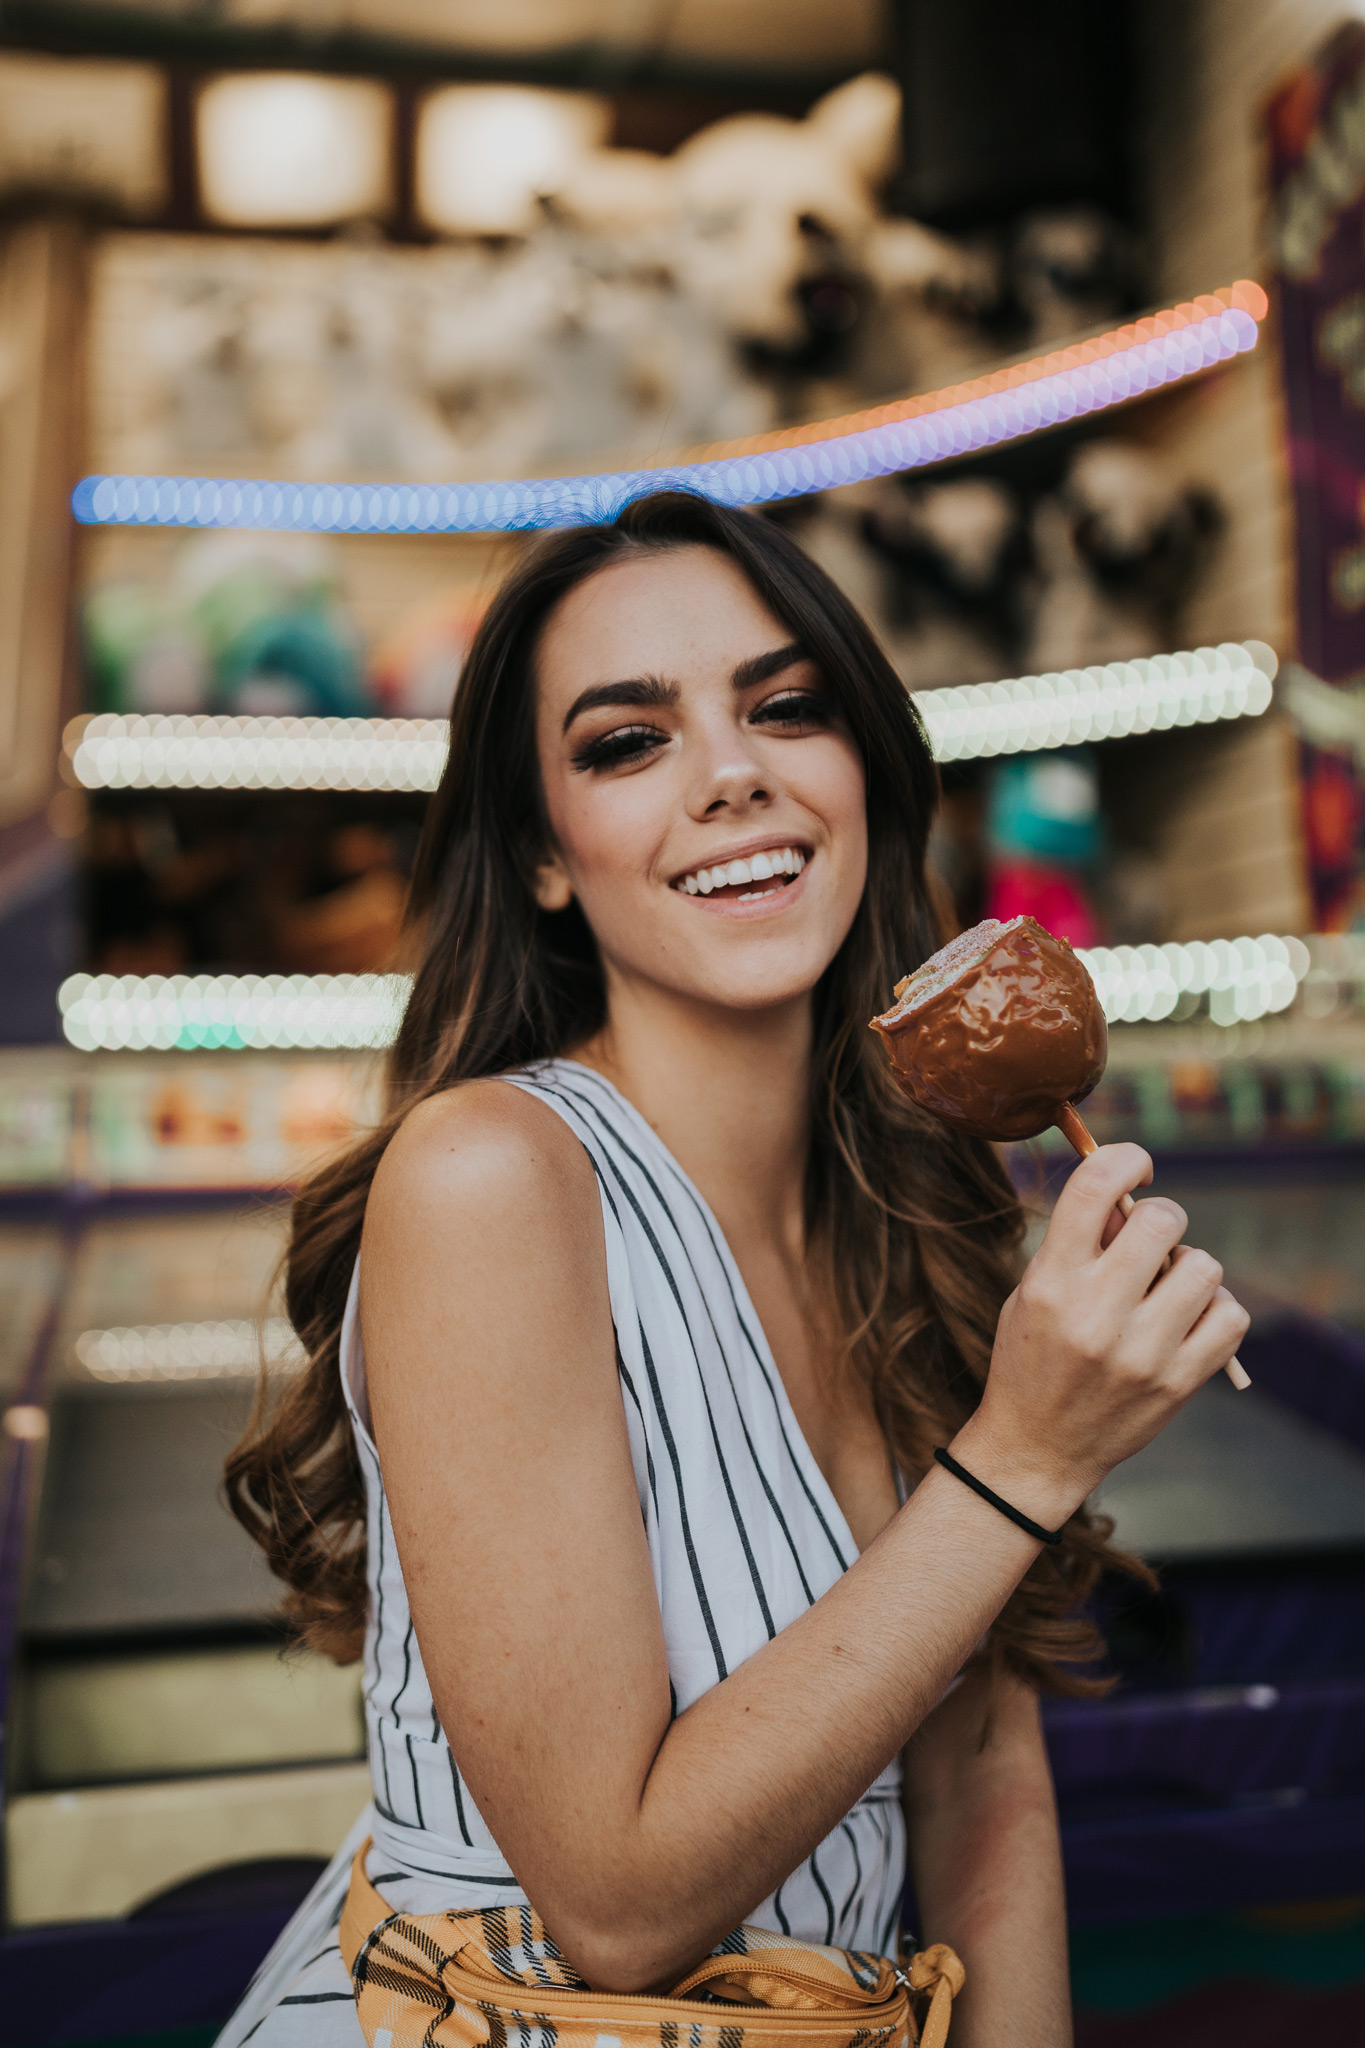 woman laughing holding candy apple at stampede midway game